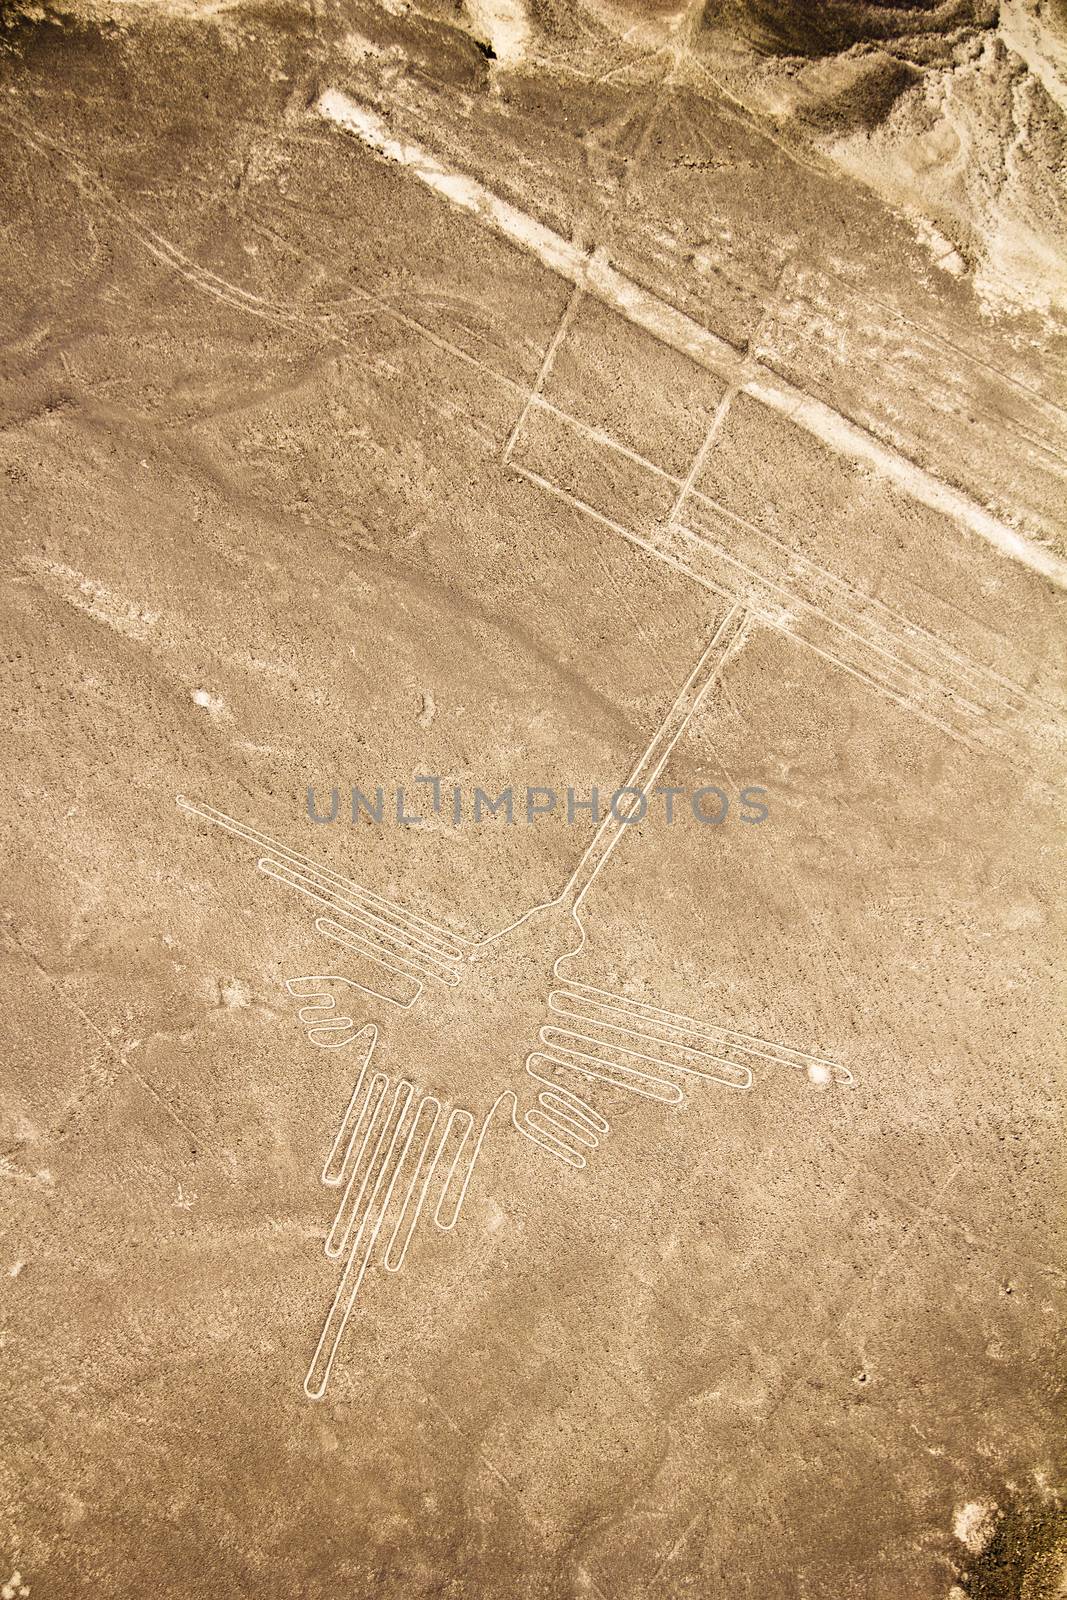 The Nazca Lines are a series of ancient geoglyphs located in the Nazca Desert in southern Peru. They were designated a UNESCO World Heritage Site. Nazca Lines were created by the Nazca culture between 400 and 650 CE.